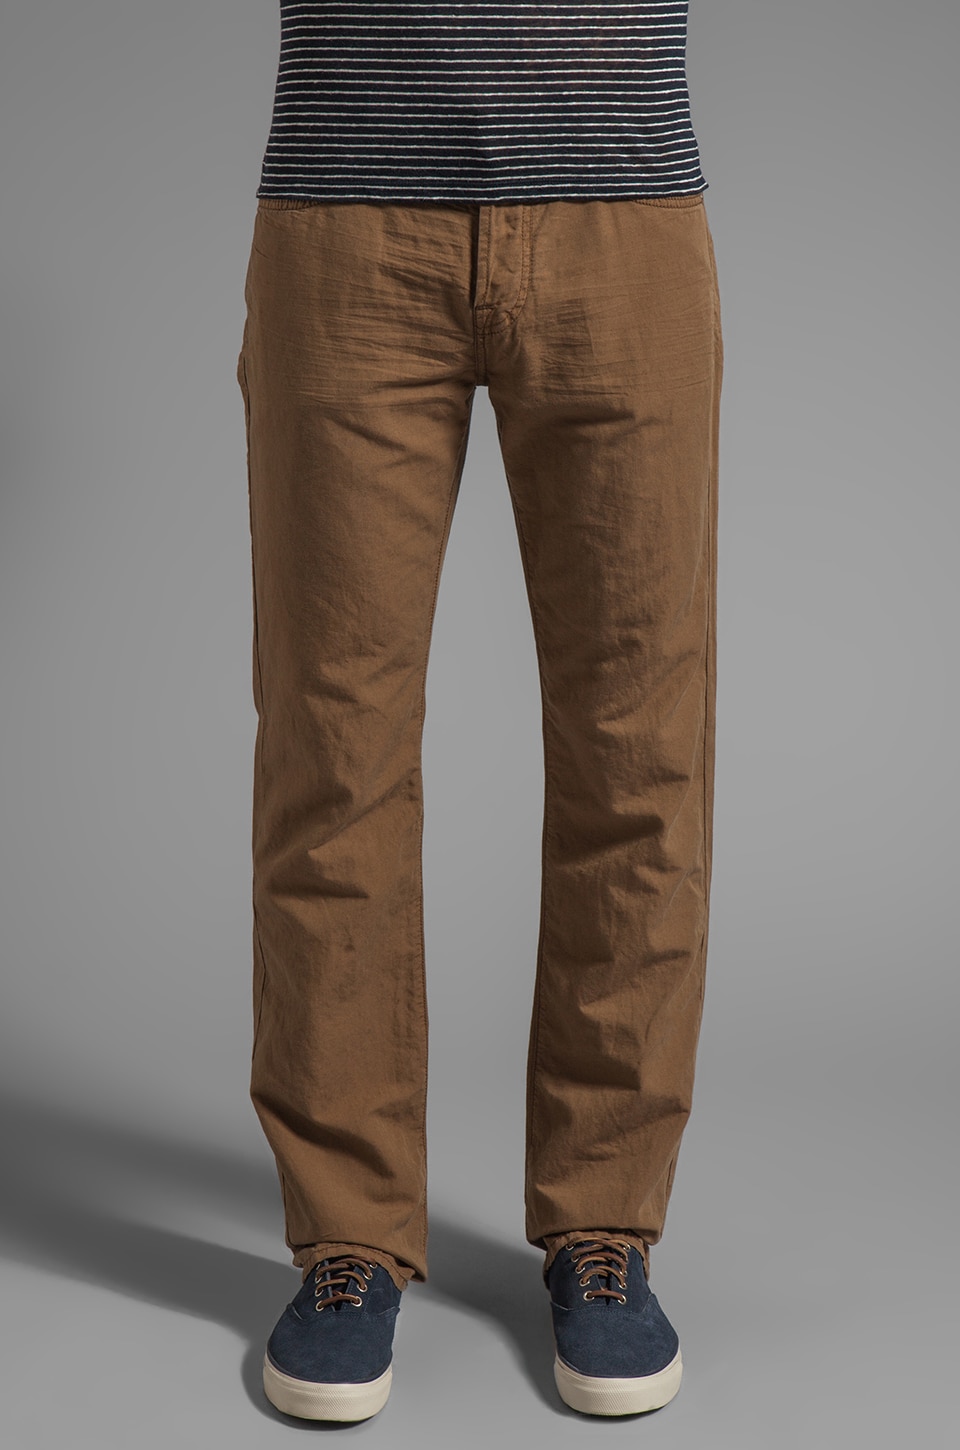 7 for all mankind pant